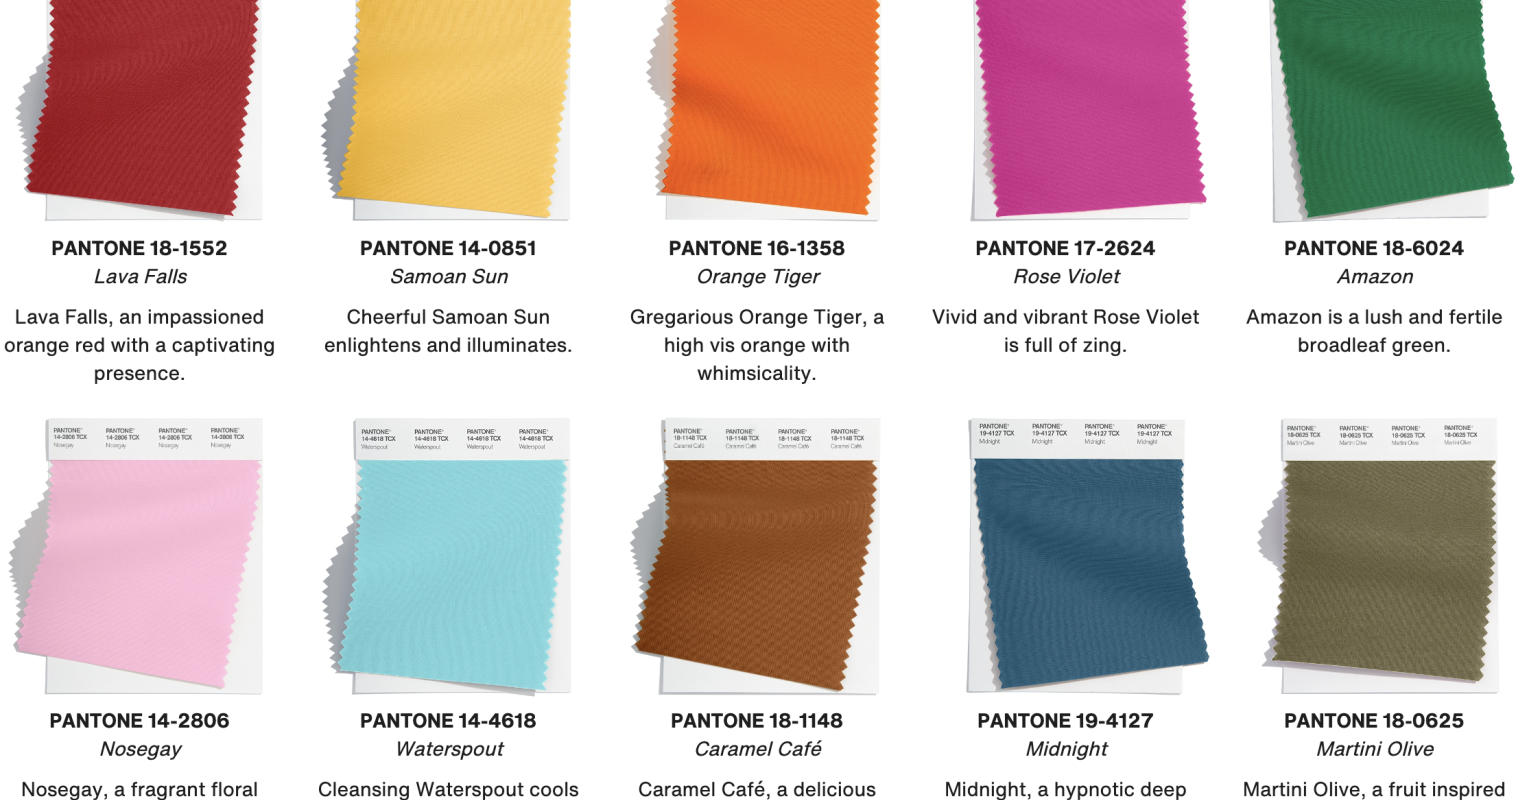 Pantone's Color Trend Forecast for Autumn/Winter 2022/2023 Special Events